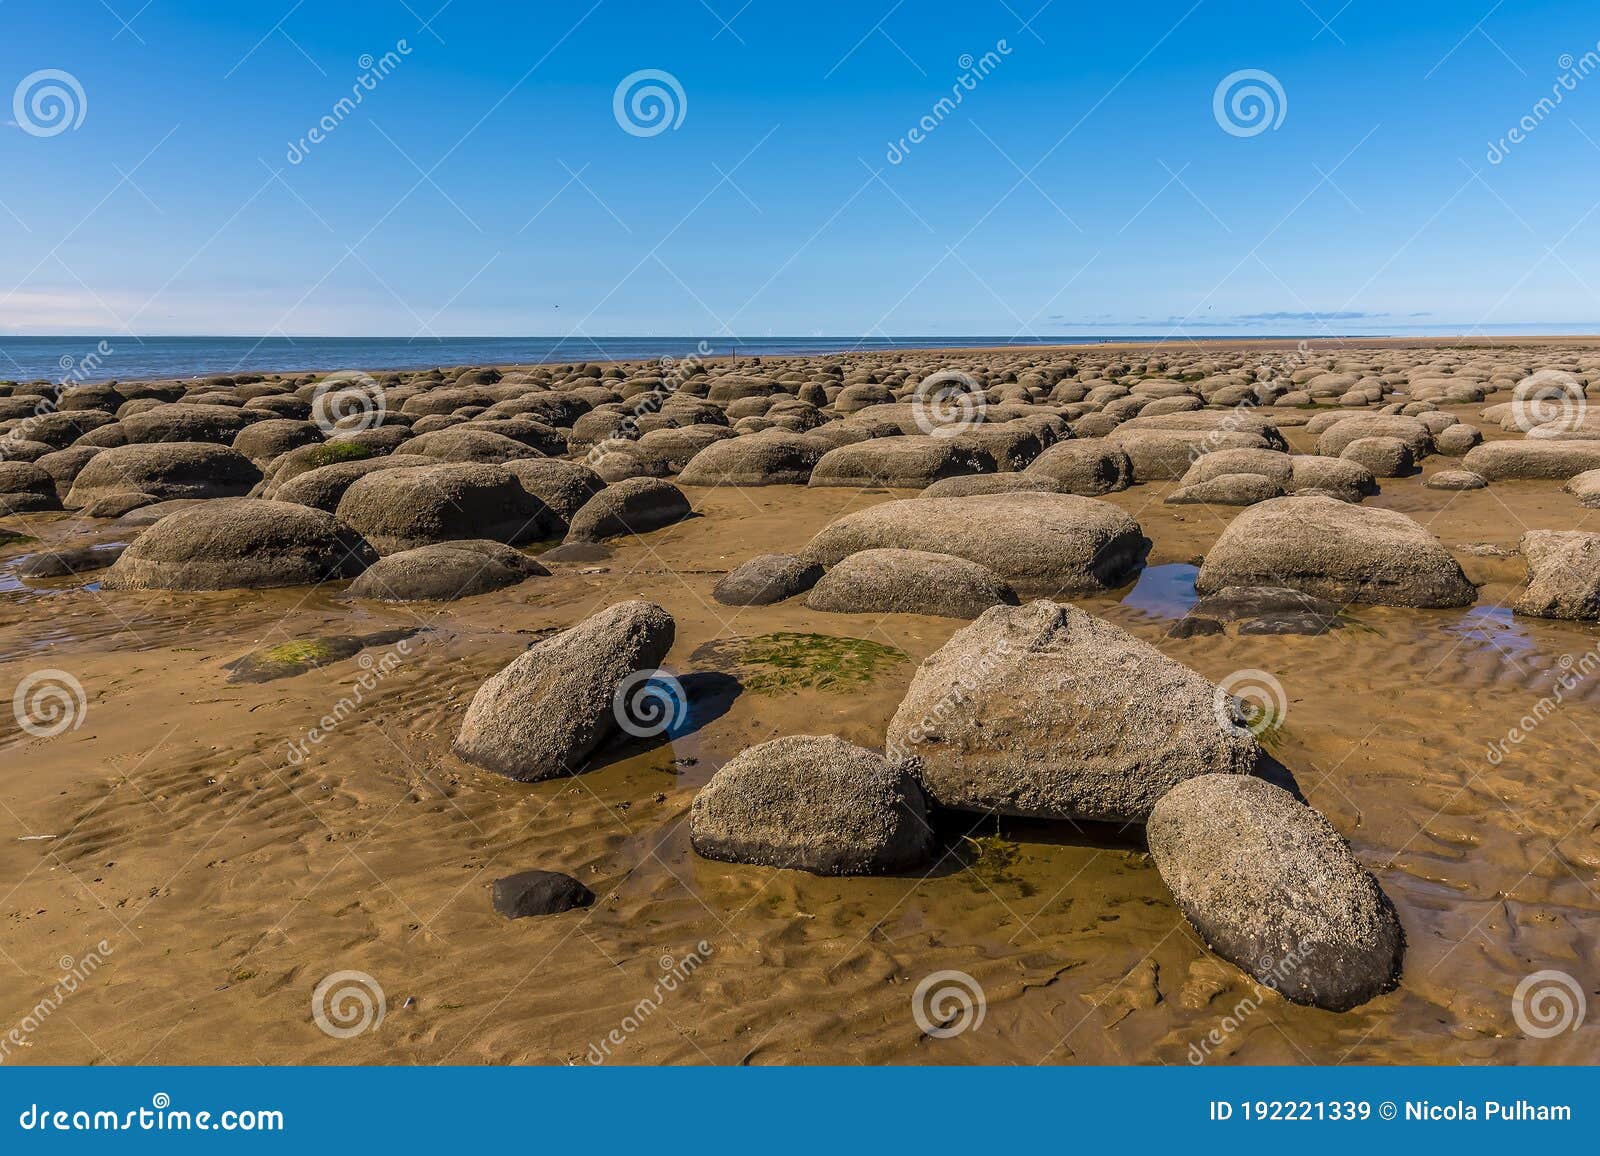 sea eroded boulders protrude from the sand at old hunstanton beach, norfolk, uk